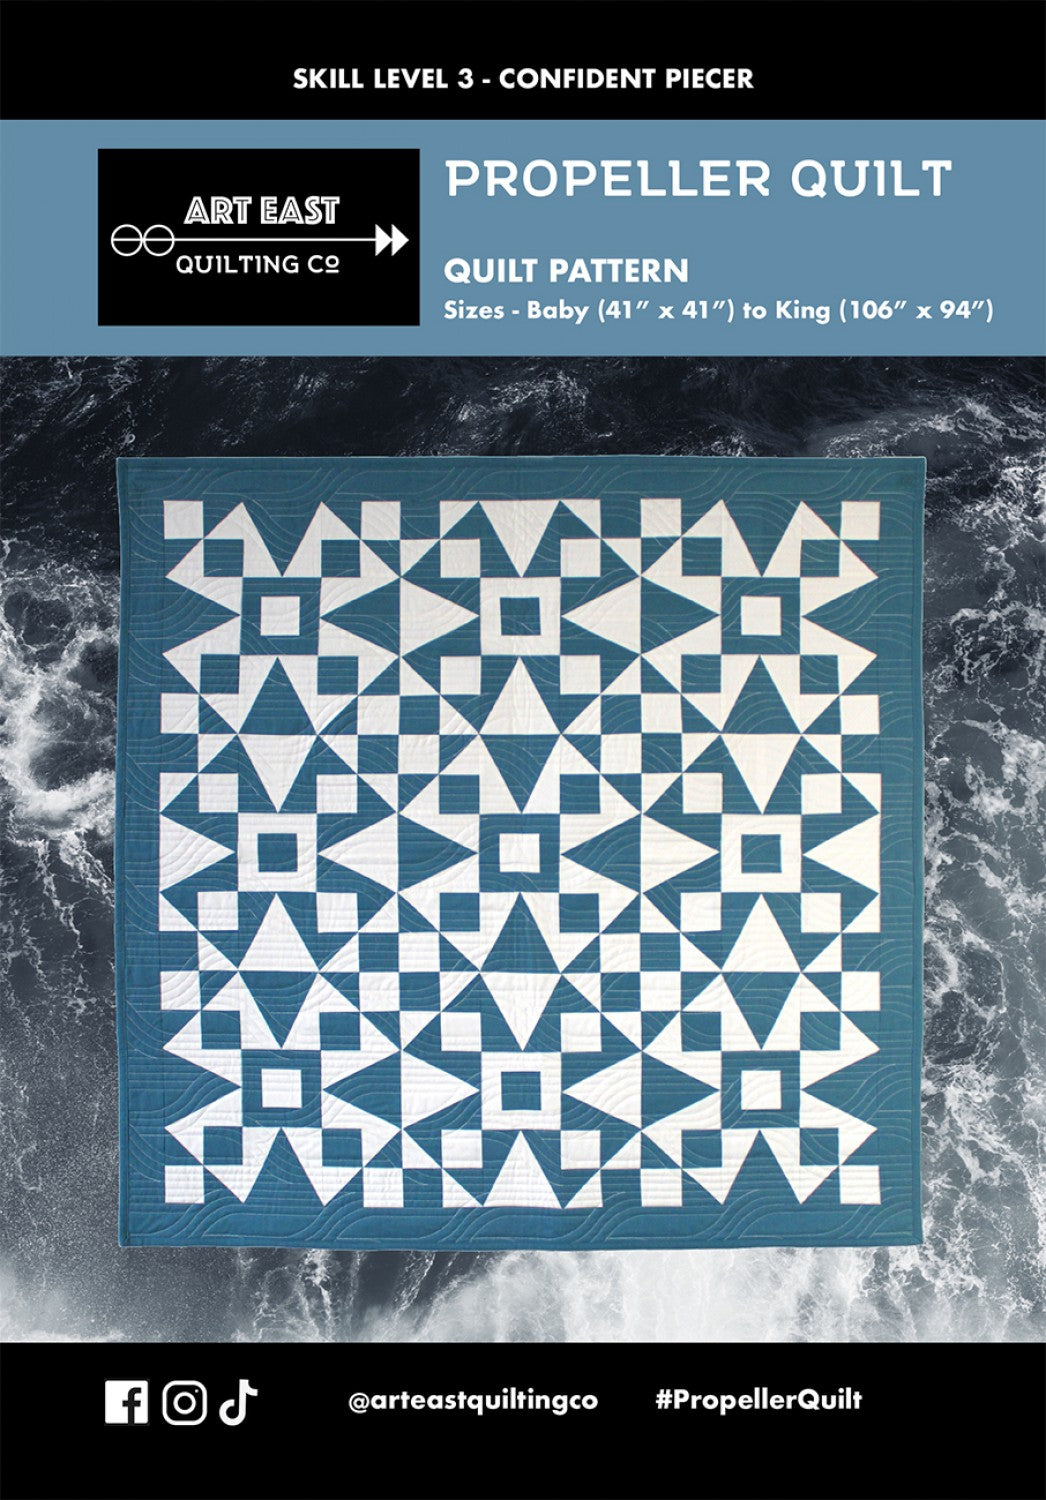 Propeller Quilt Pattern by Art East Quilting Co.